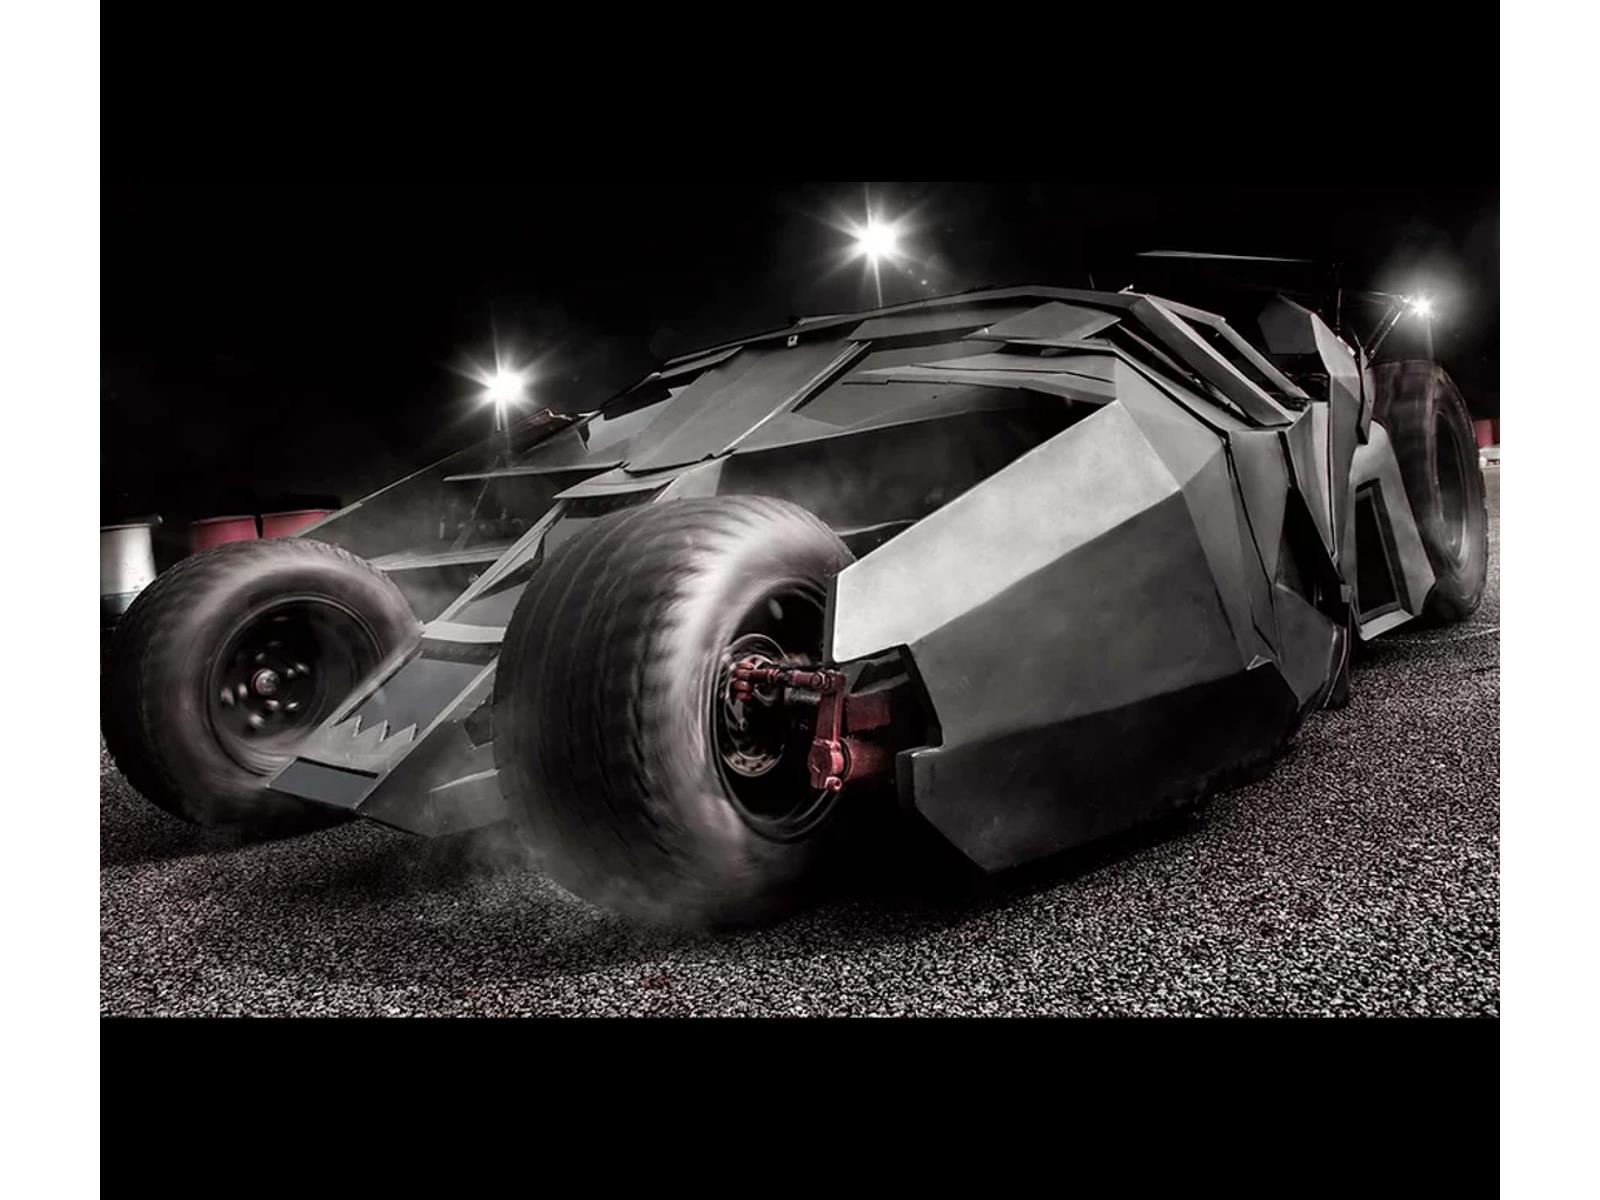 Behold The World's First Real Electric Batmobile Ready To Take